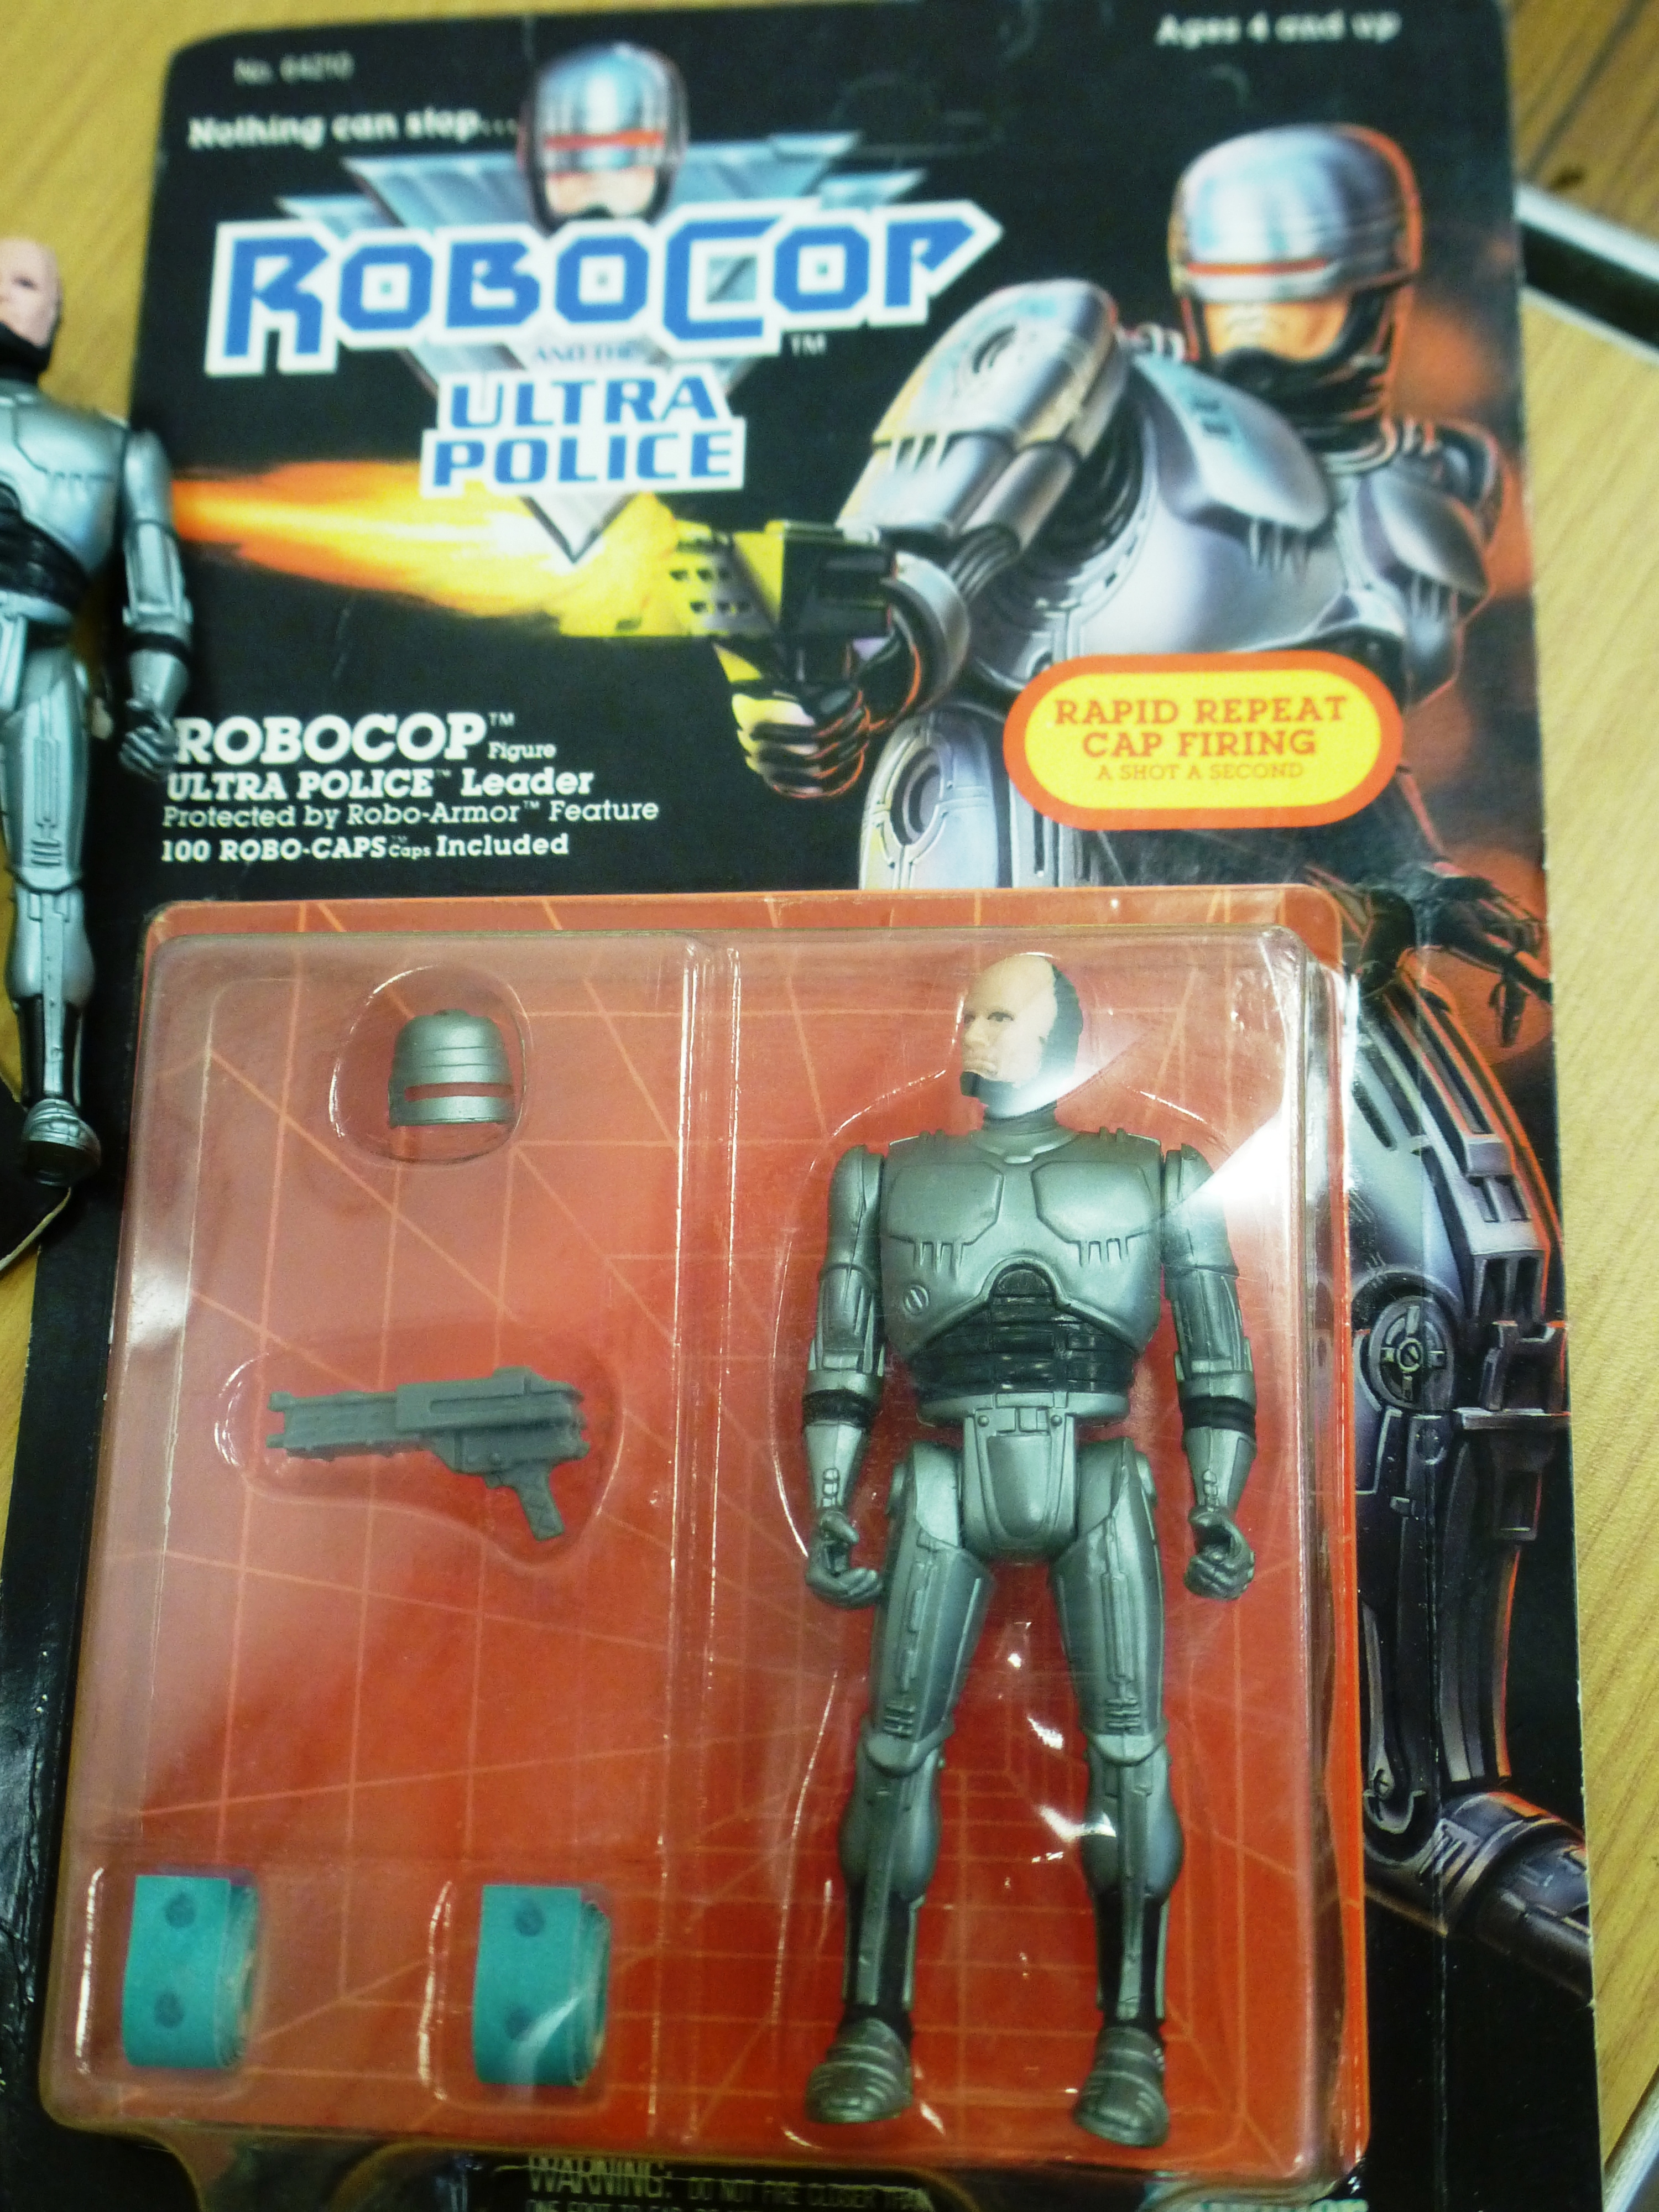 6 ROBOCOP ULTRA POLICE LEADER FIGURES AND A LARGE ROBOCOP FIGURE - Image 3 of 5